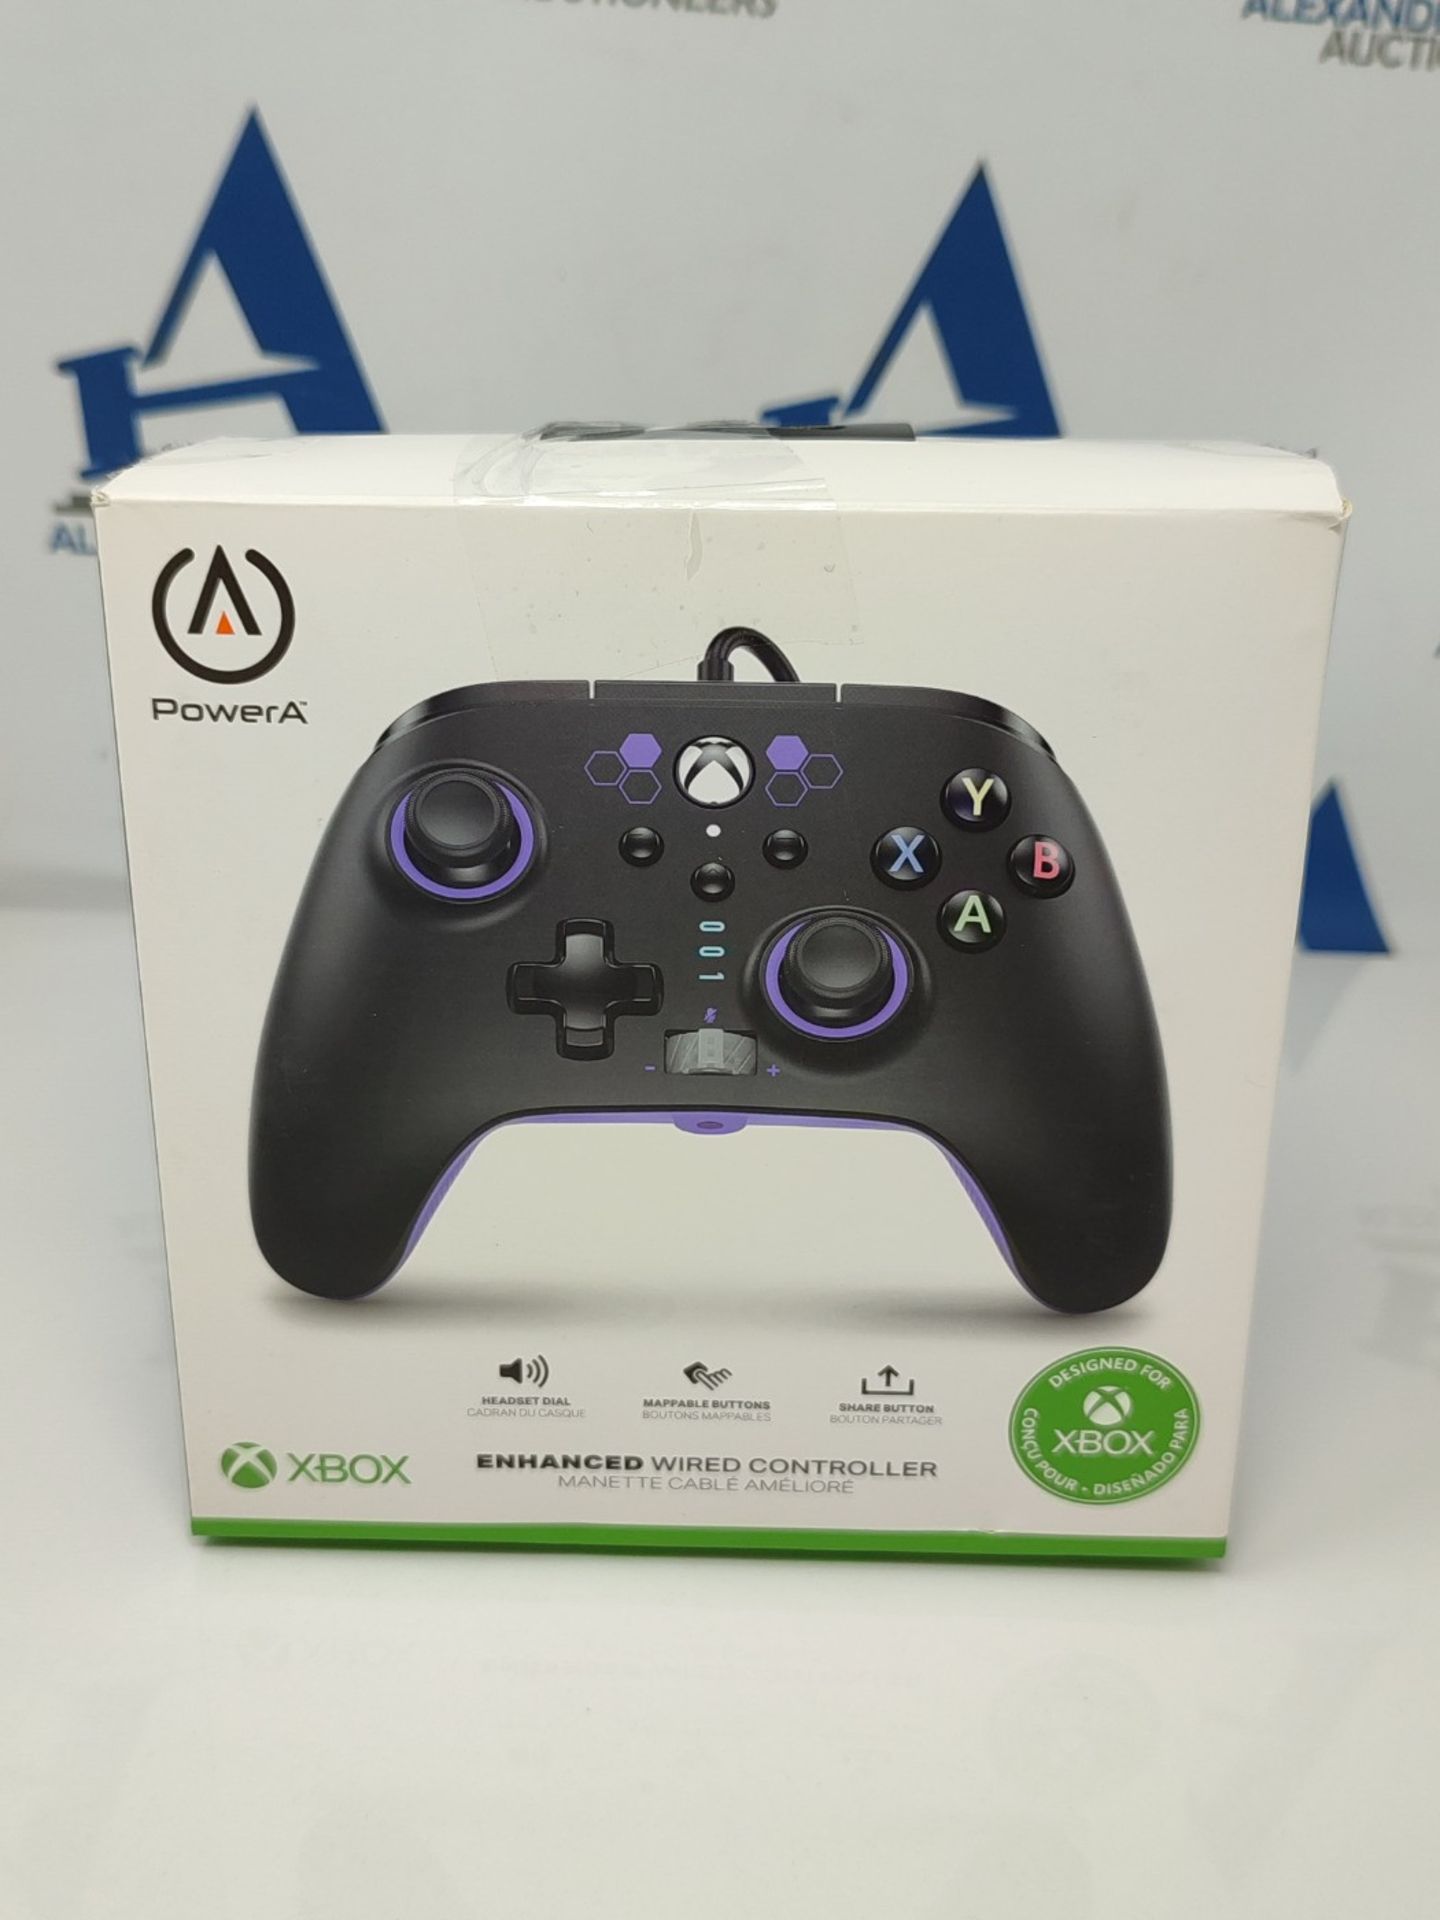 Enhanced wired PowerA controller for Xbox Series X|S - Hex Purple - Image 5 of 6